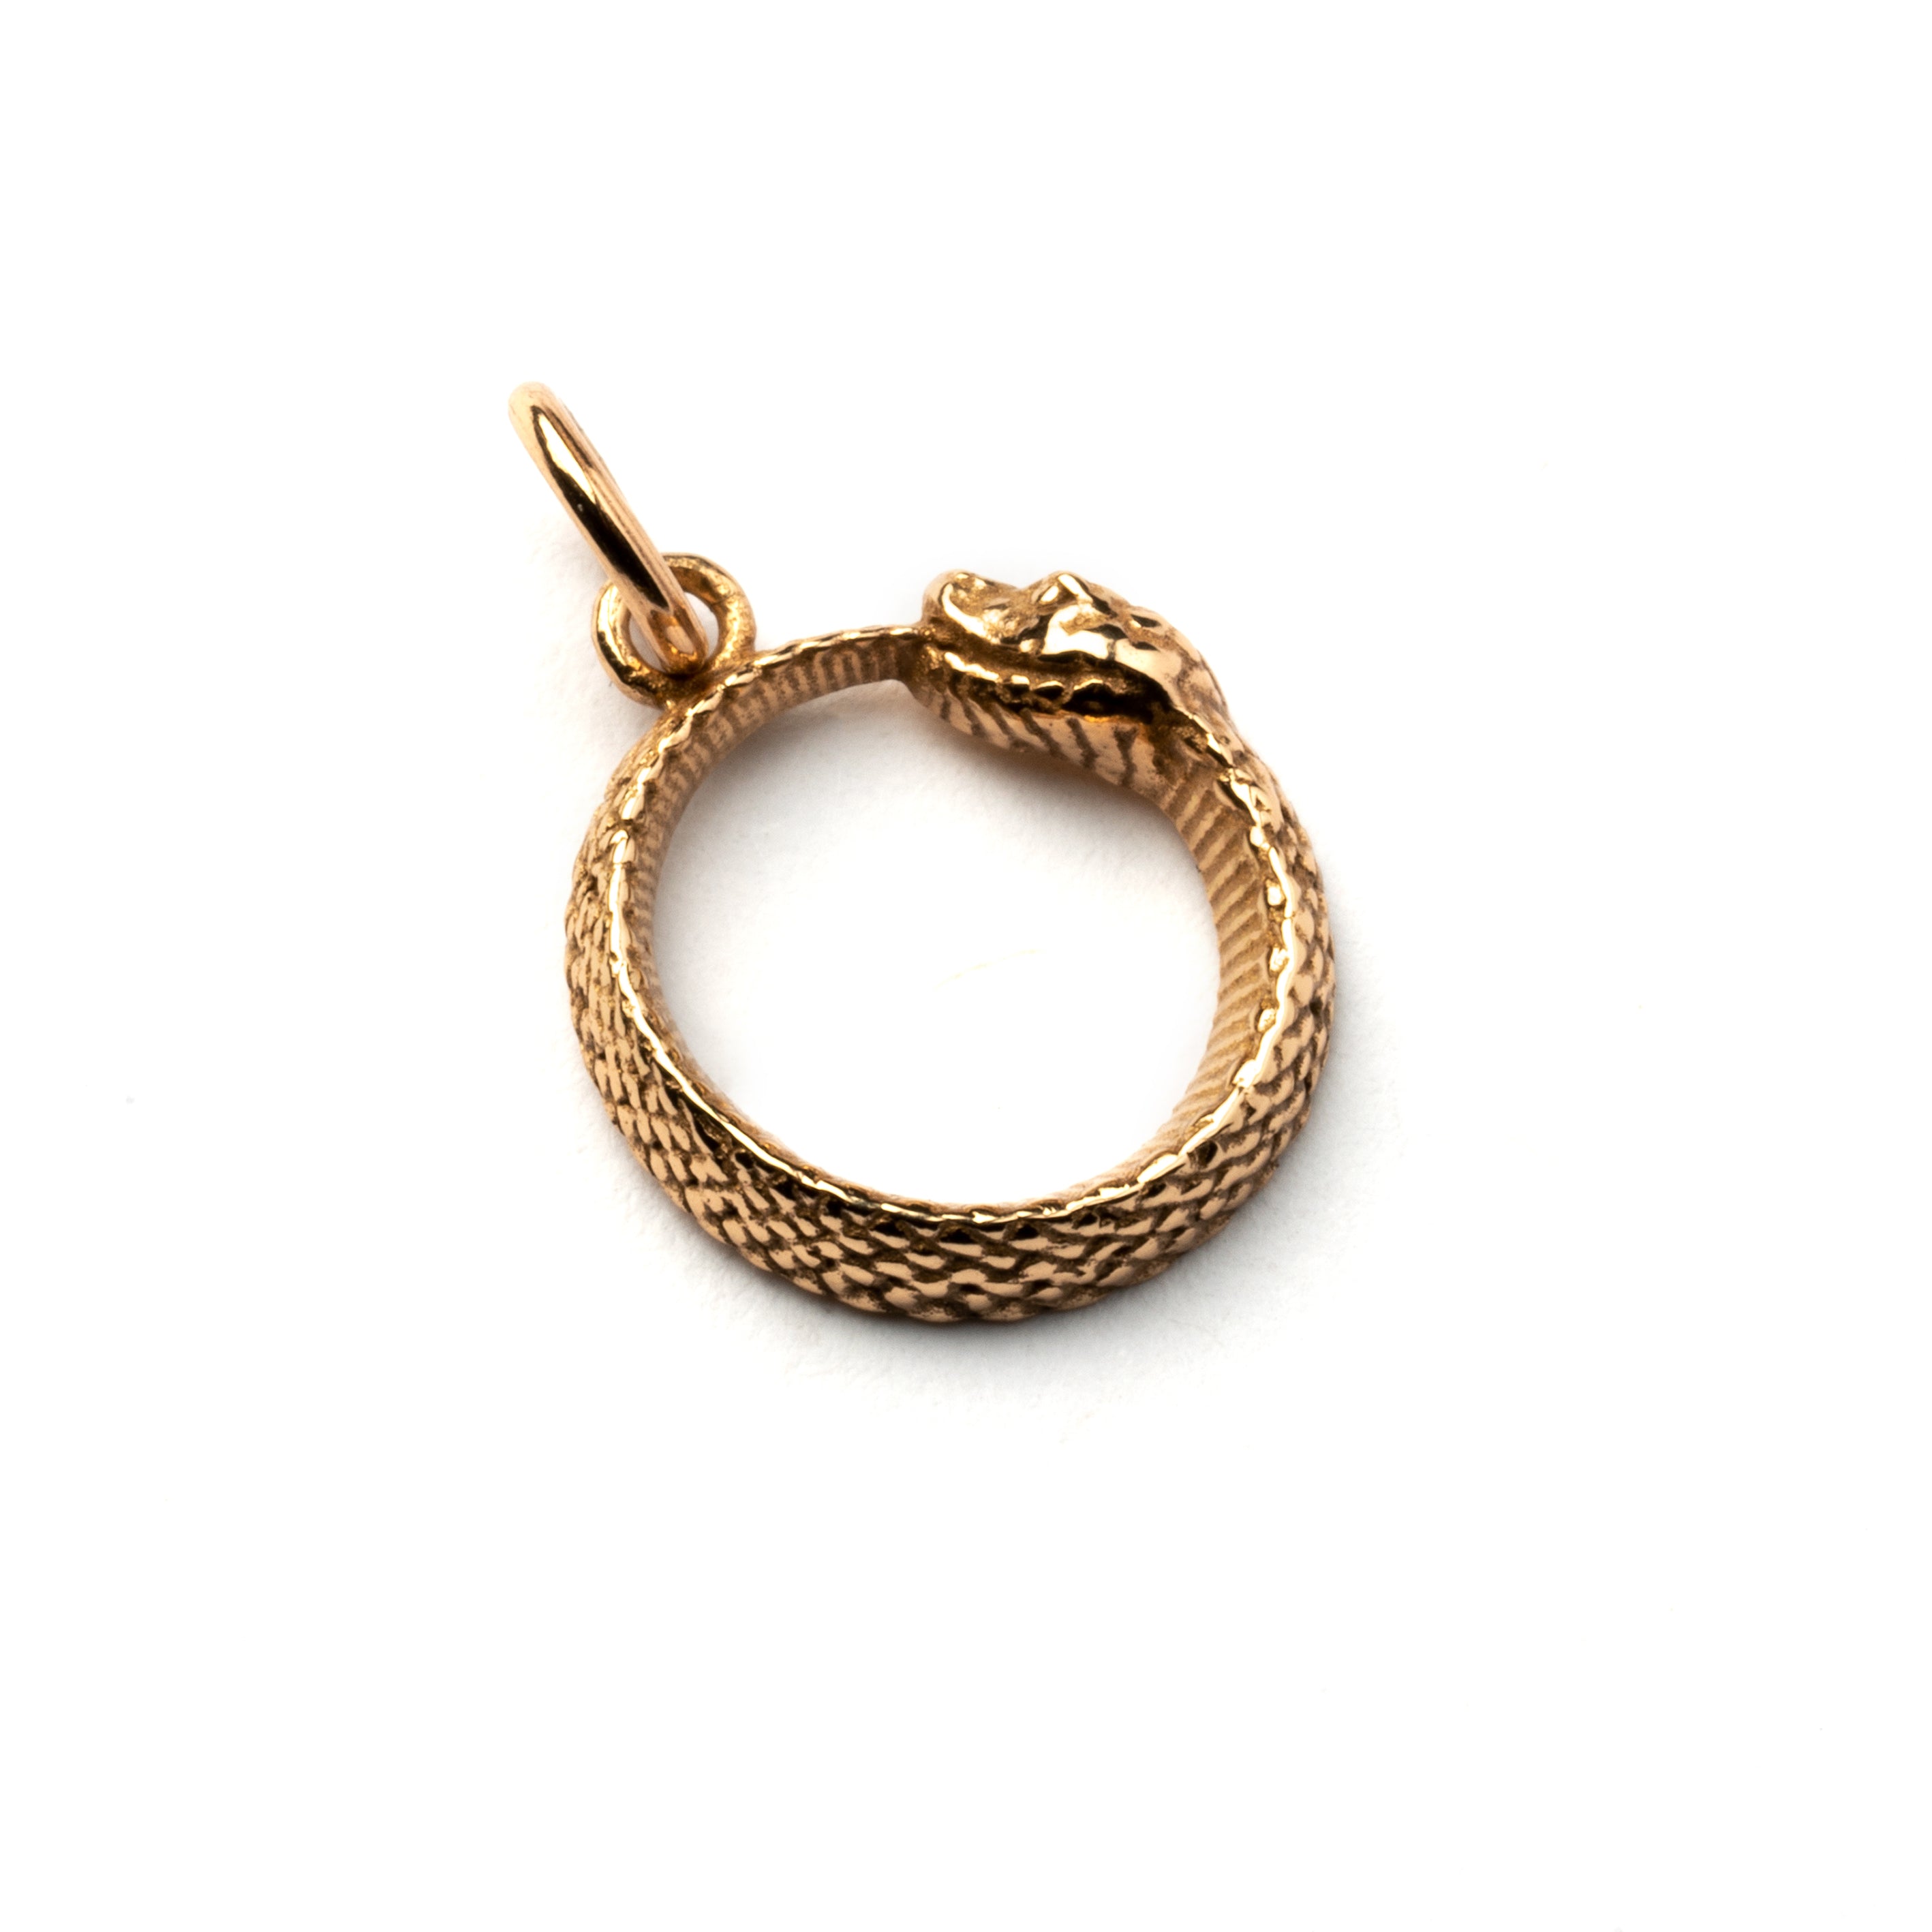 Tiny Bronze Ouroboros snake Charm necklace left side view